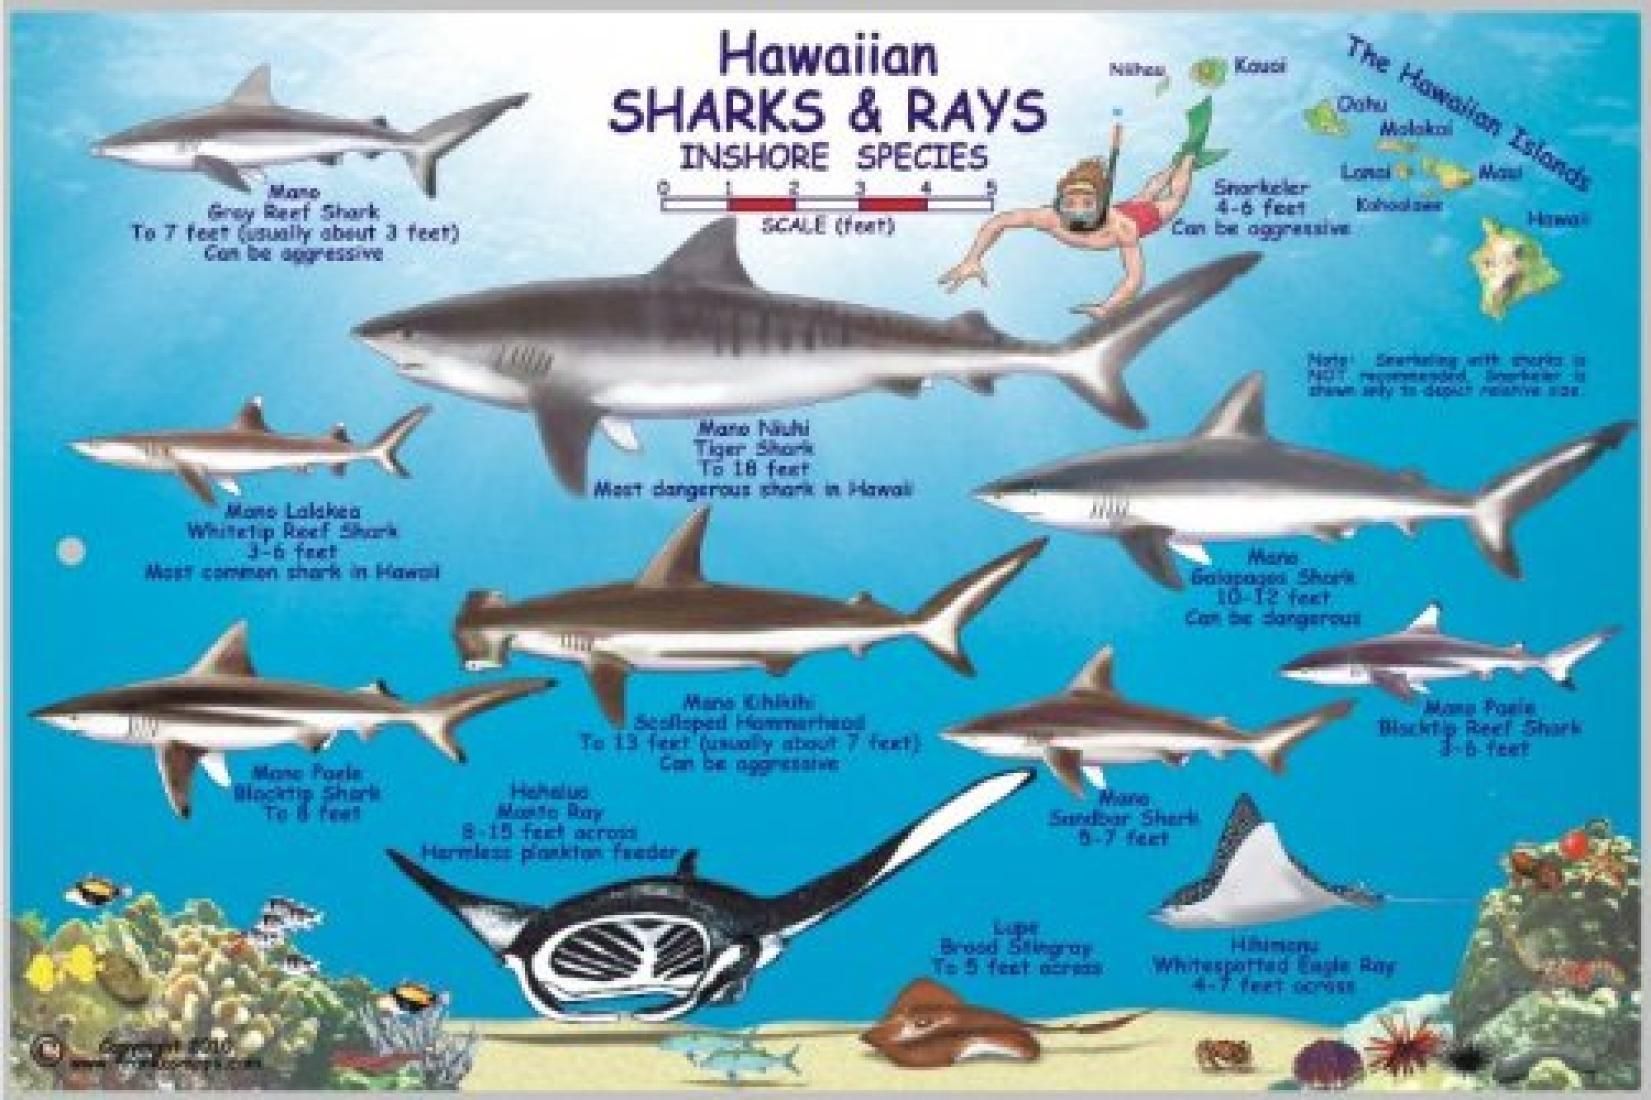 Hawaiian Sharks and Rays Offshore and Inshore Species by